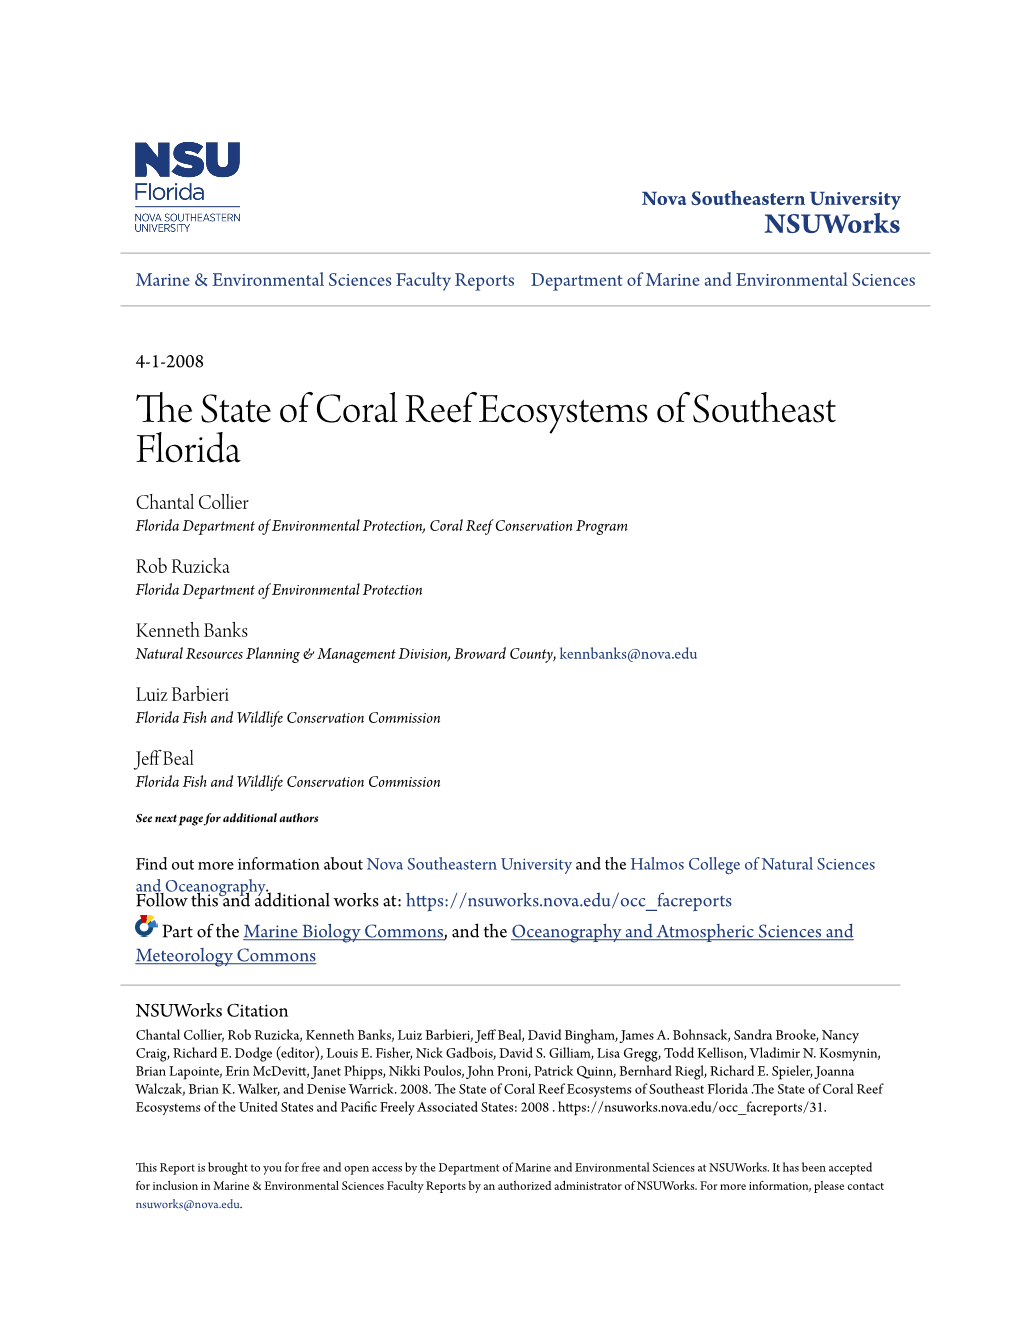 The State of Coral Reef Ecosystems of Southeast Florida the State of Coral Reef Ecosystems of Southeast Florida